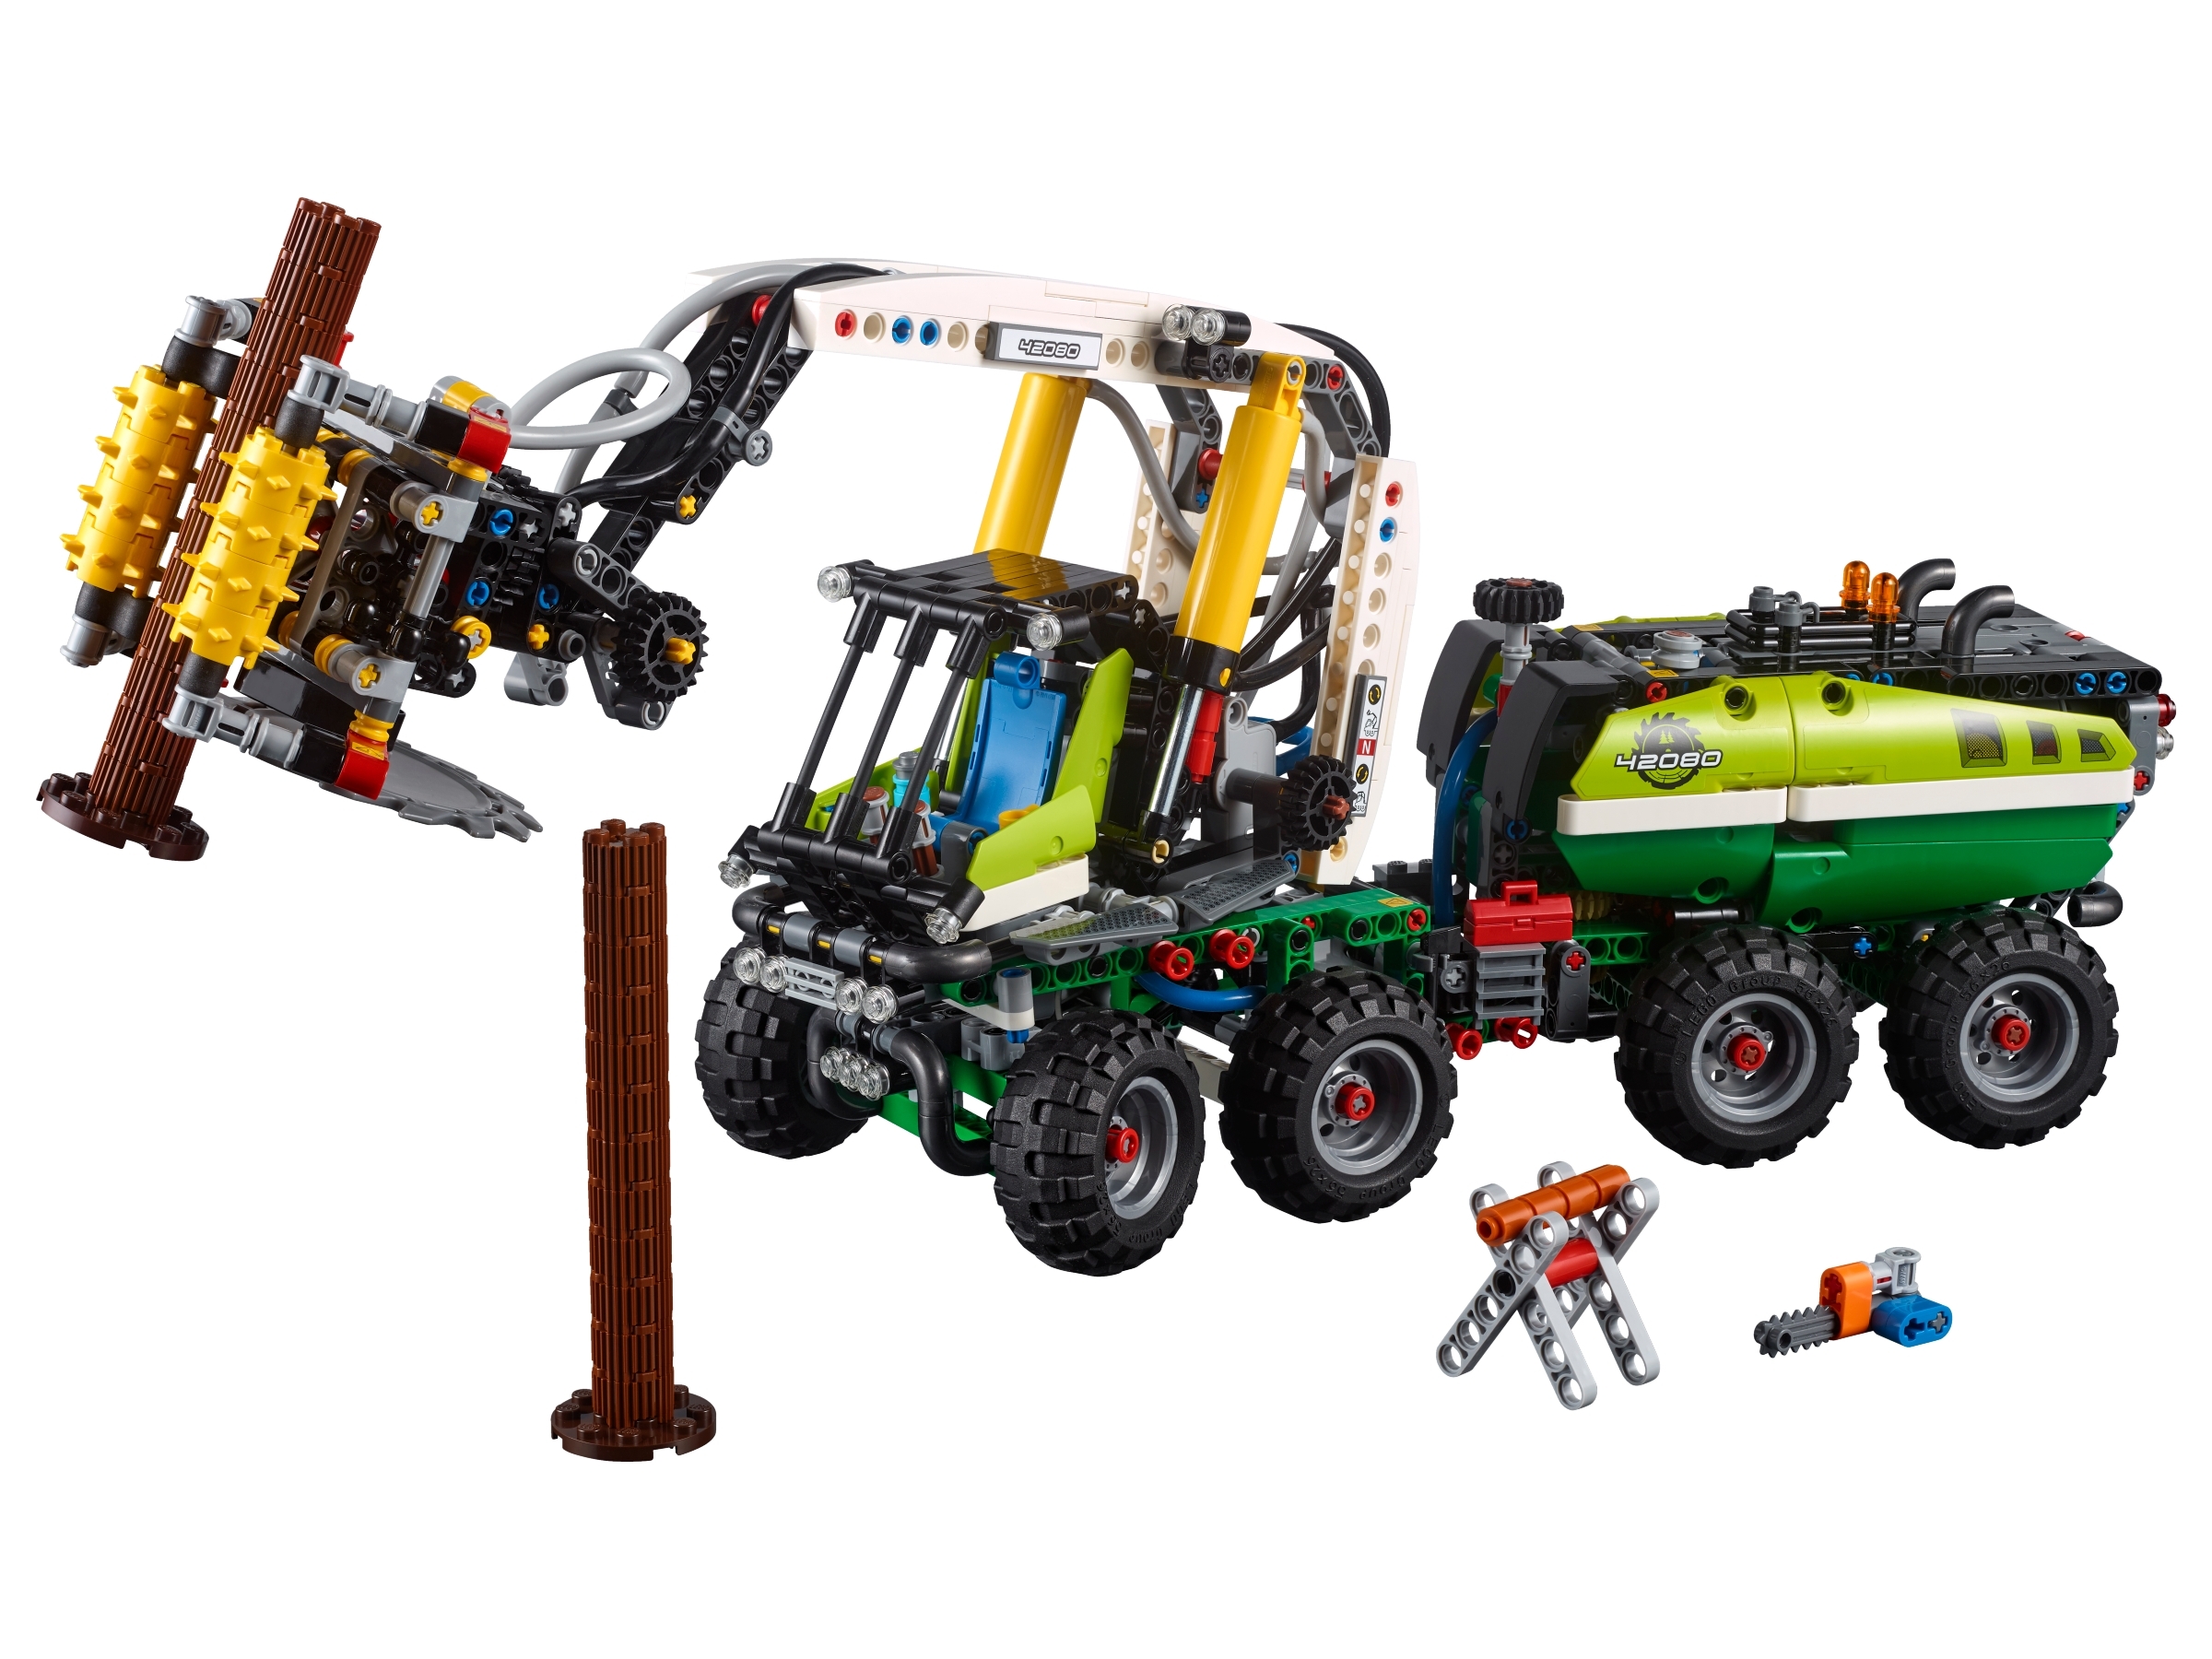 LEGO Technic 42080 Harvester-Forstmaschine Forest Machine Le camion N8/18 